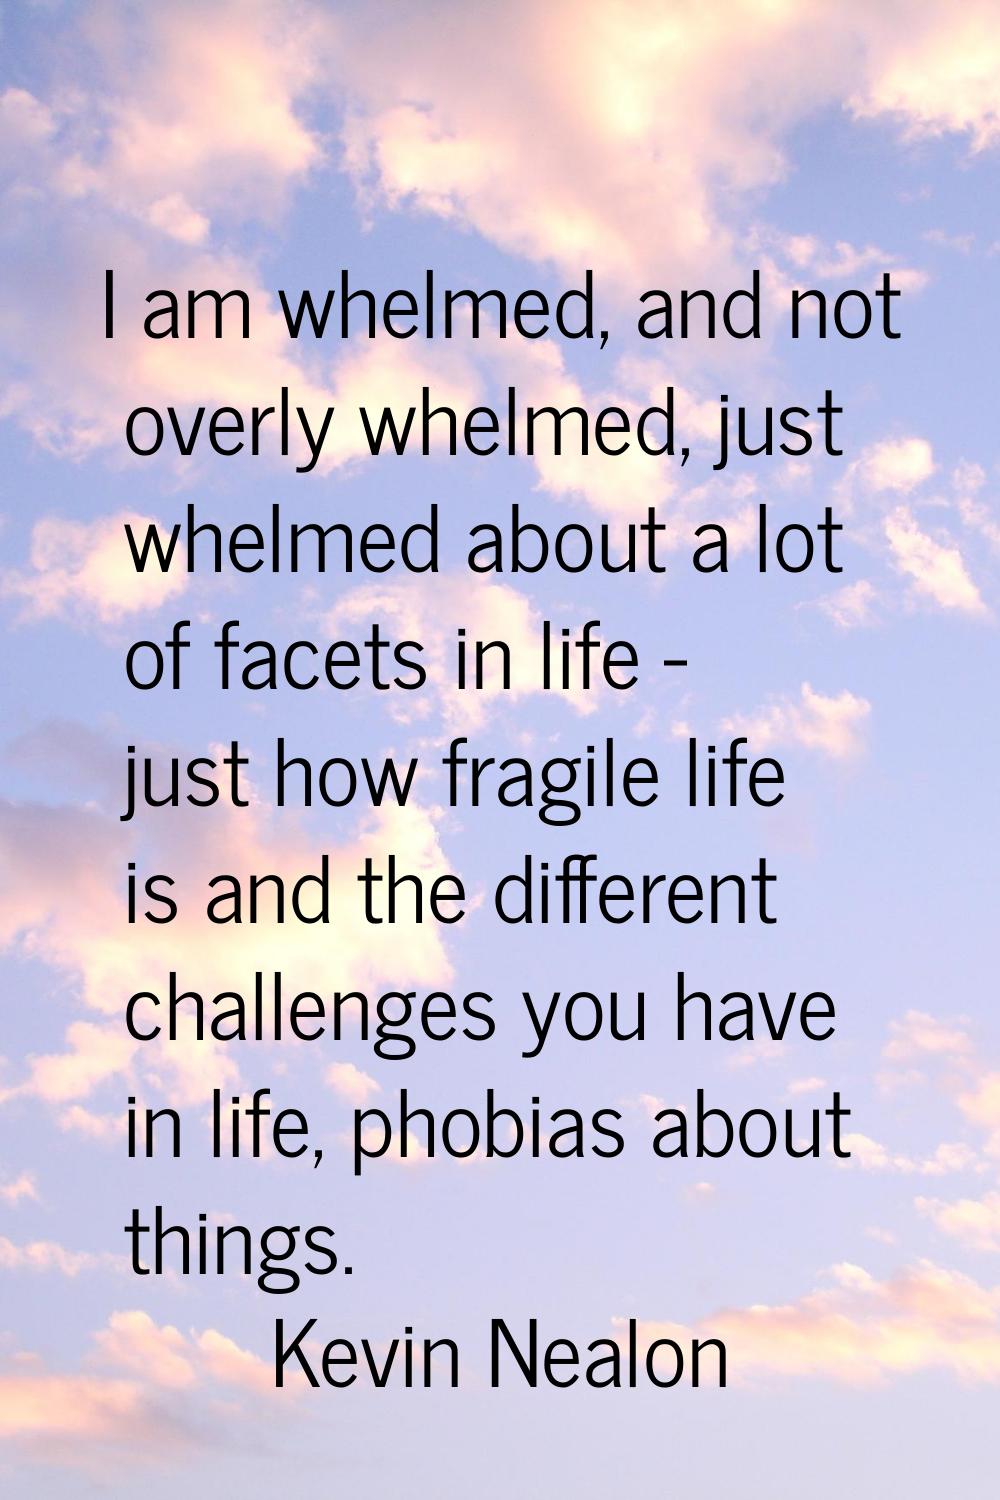 I am whelmed, and not overly whelmed, just whelmed about a lot of facets in life - just how fragile